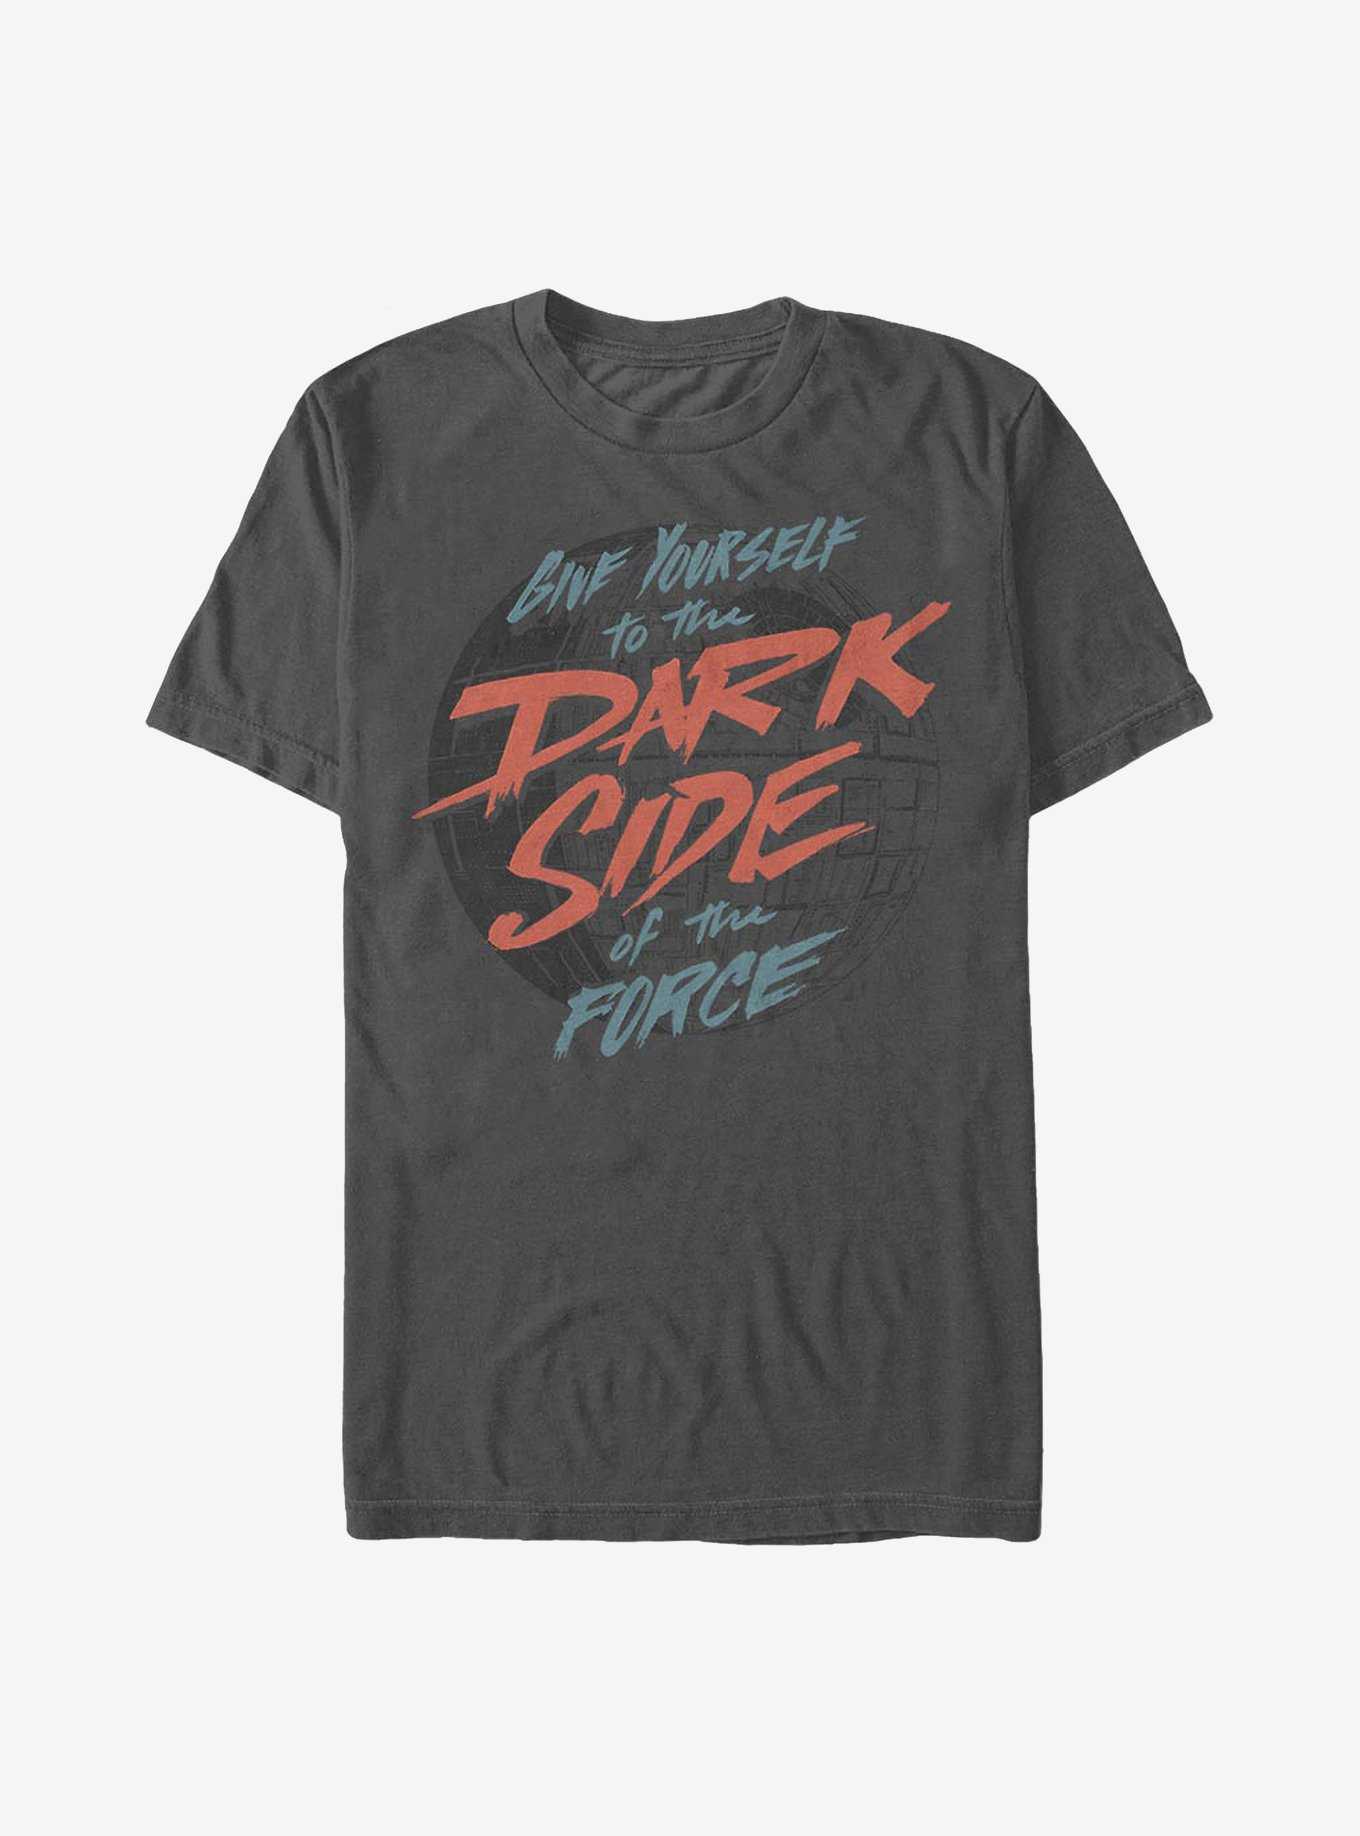 Star Wars Give Yourself To The Dark Side T-Shirt, , hi-res